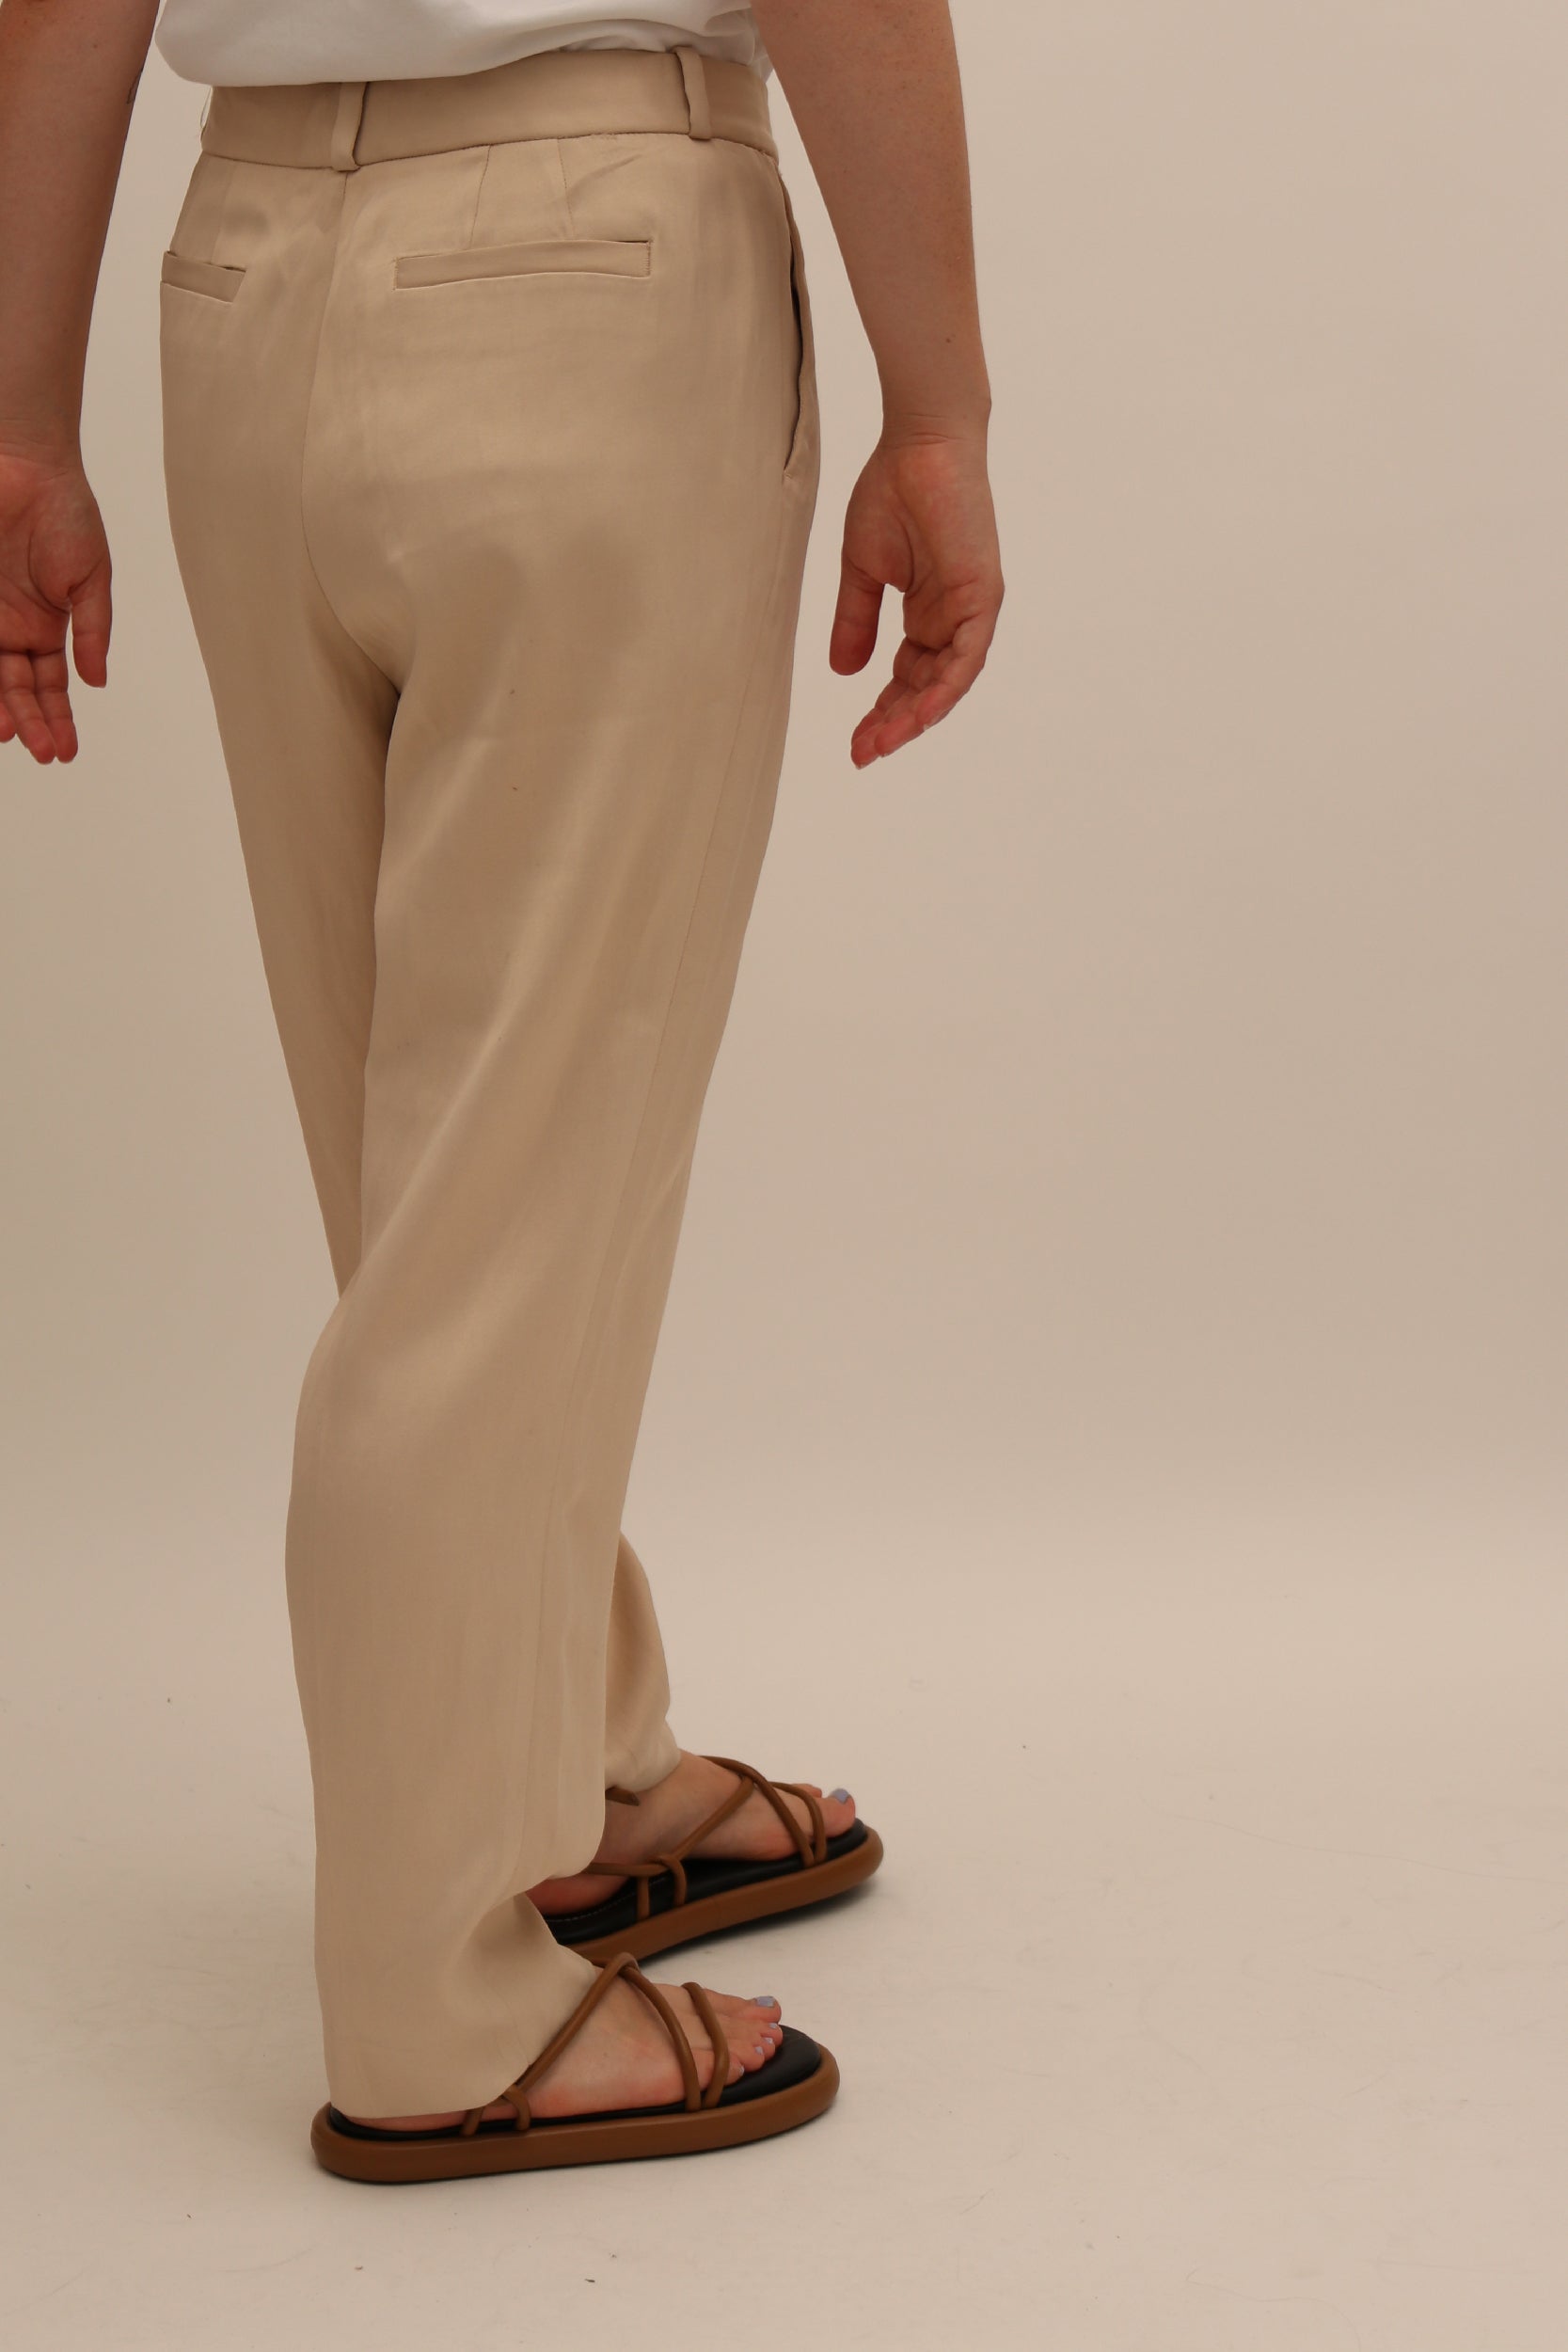 Massimo Dutti trousers for sale in Co. Wexford for €35 on DoneDeal